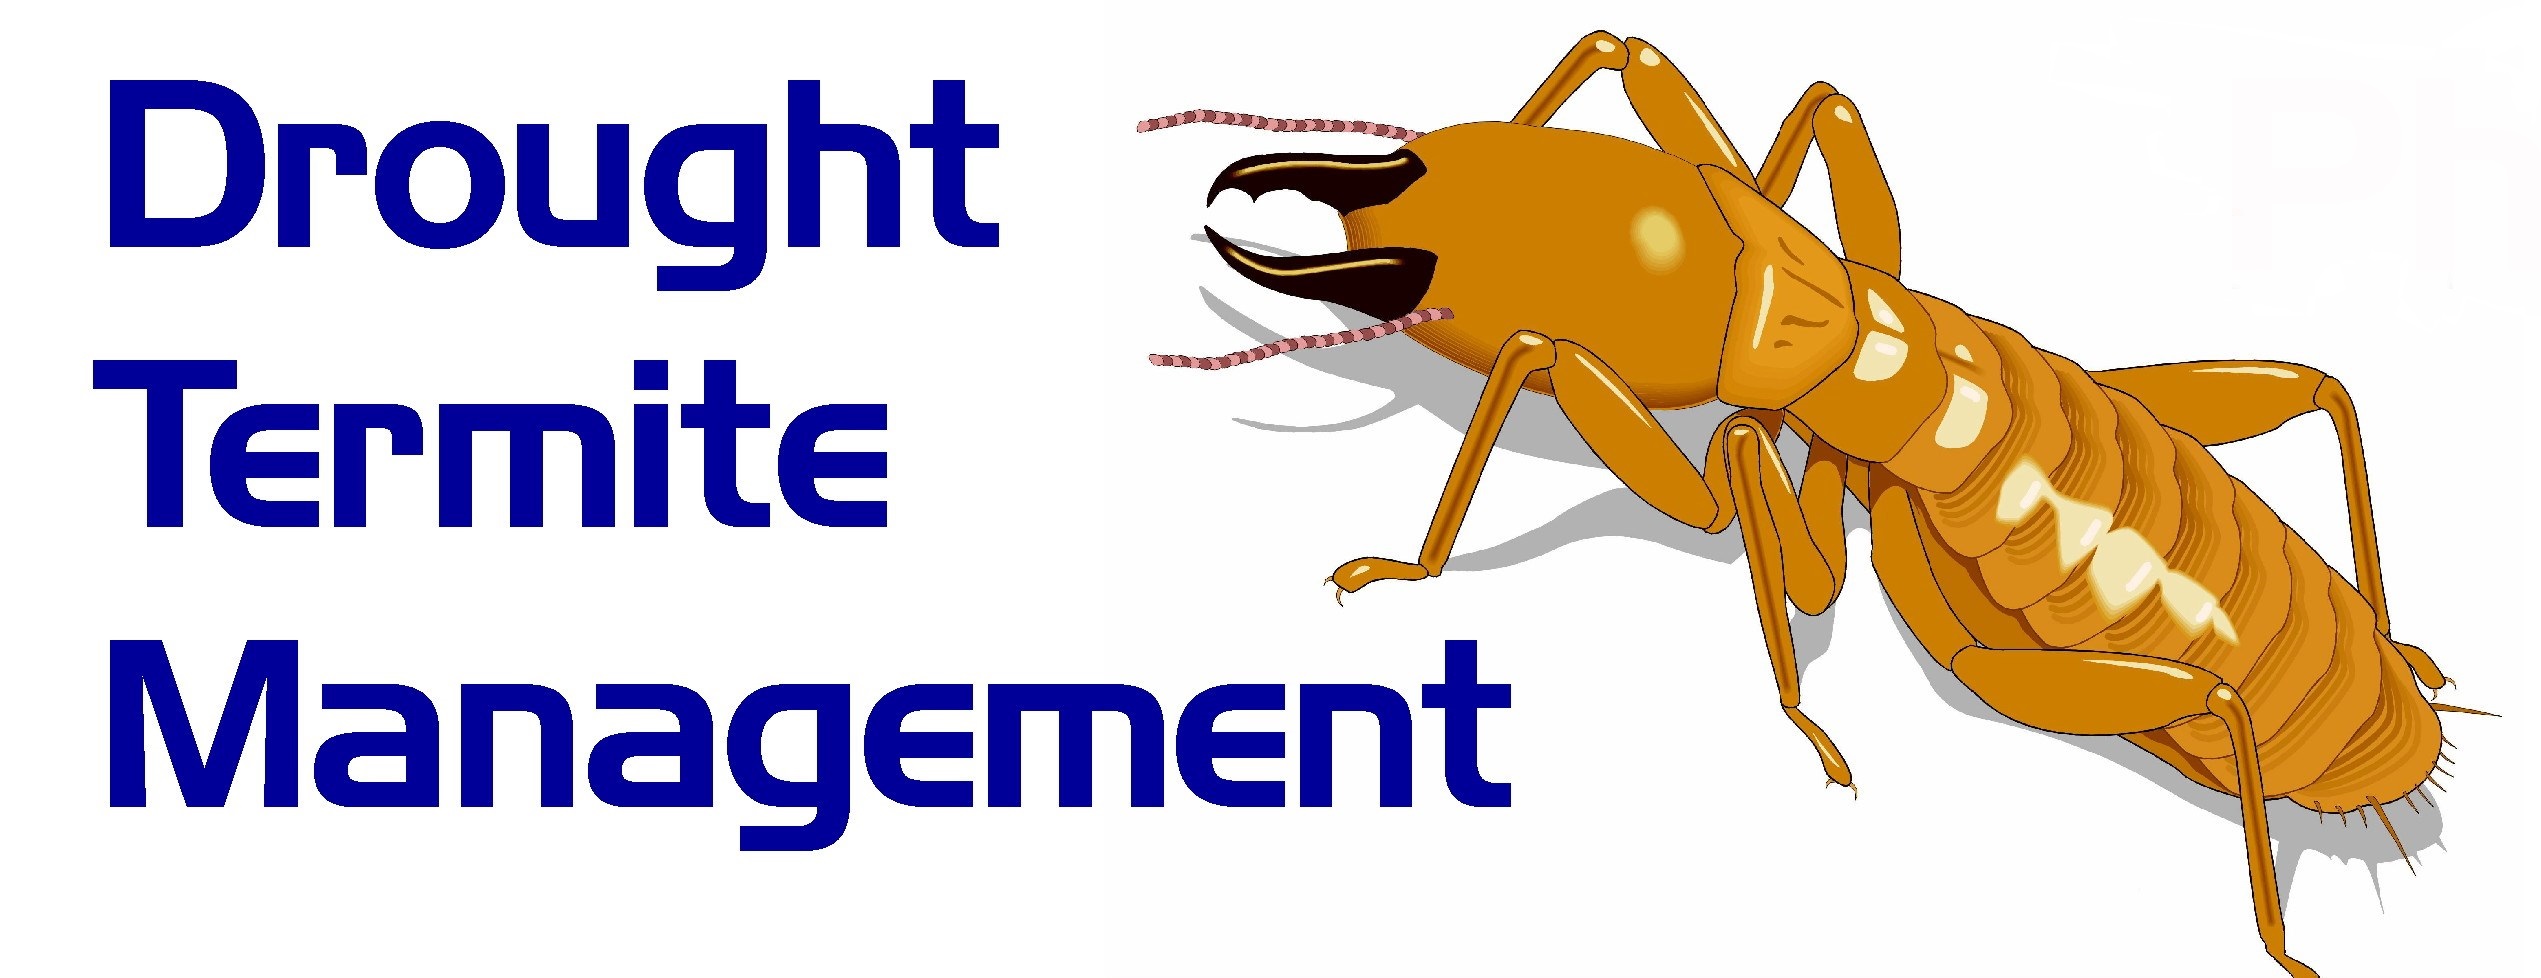 Drought Termite Management logo amended